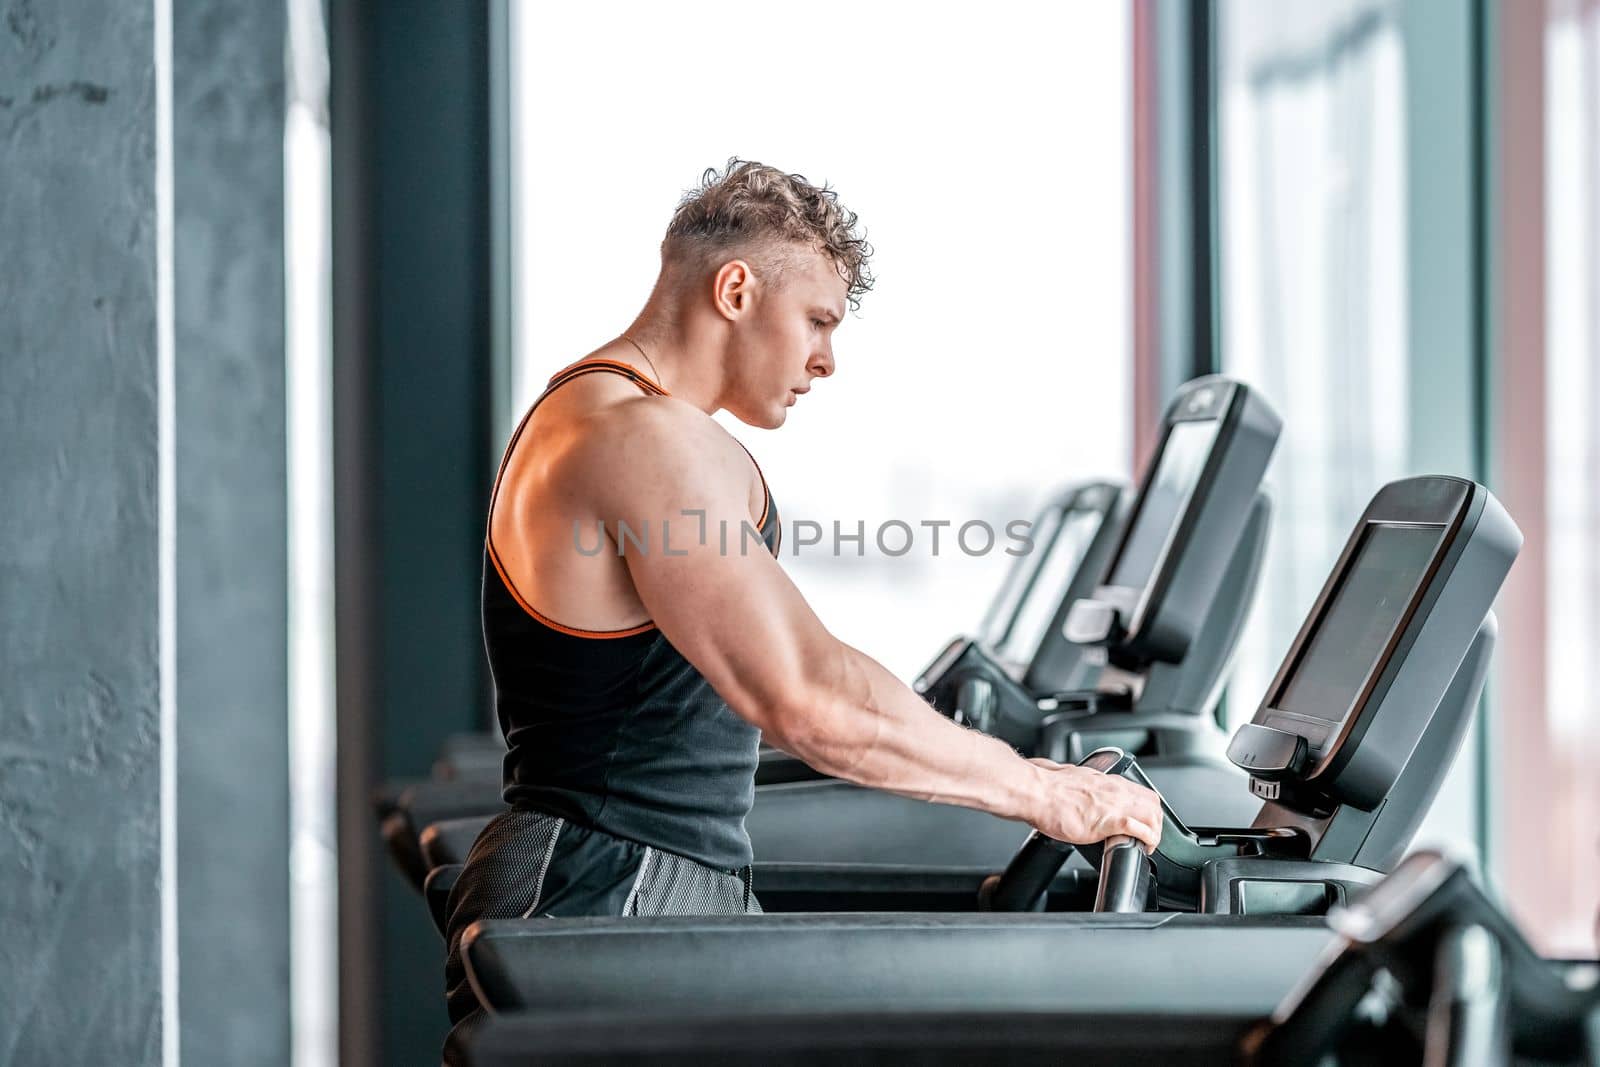 athlete on a treadmill in the gym. High quality photo